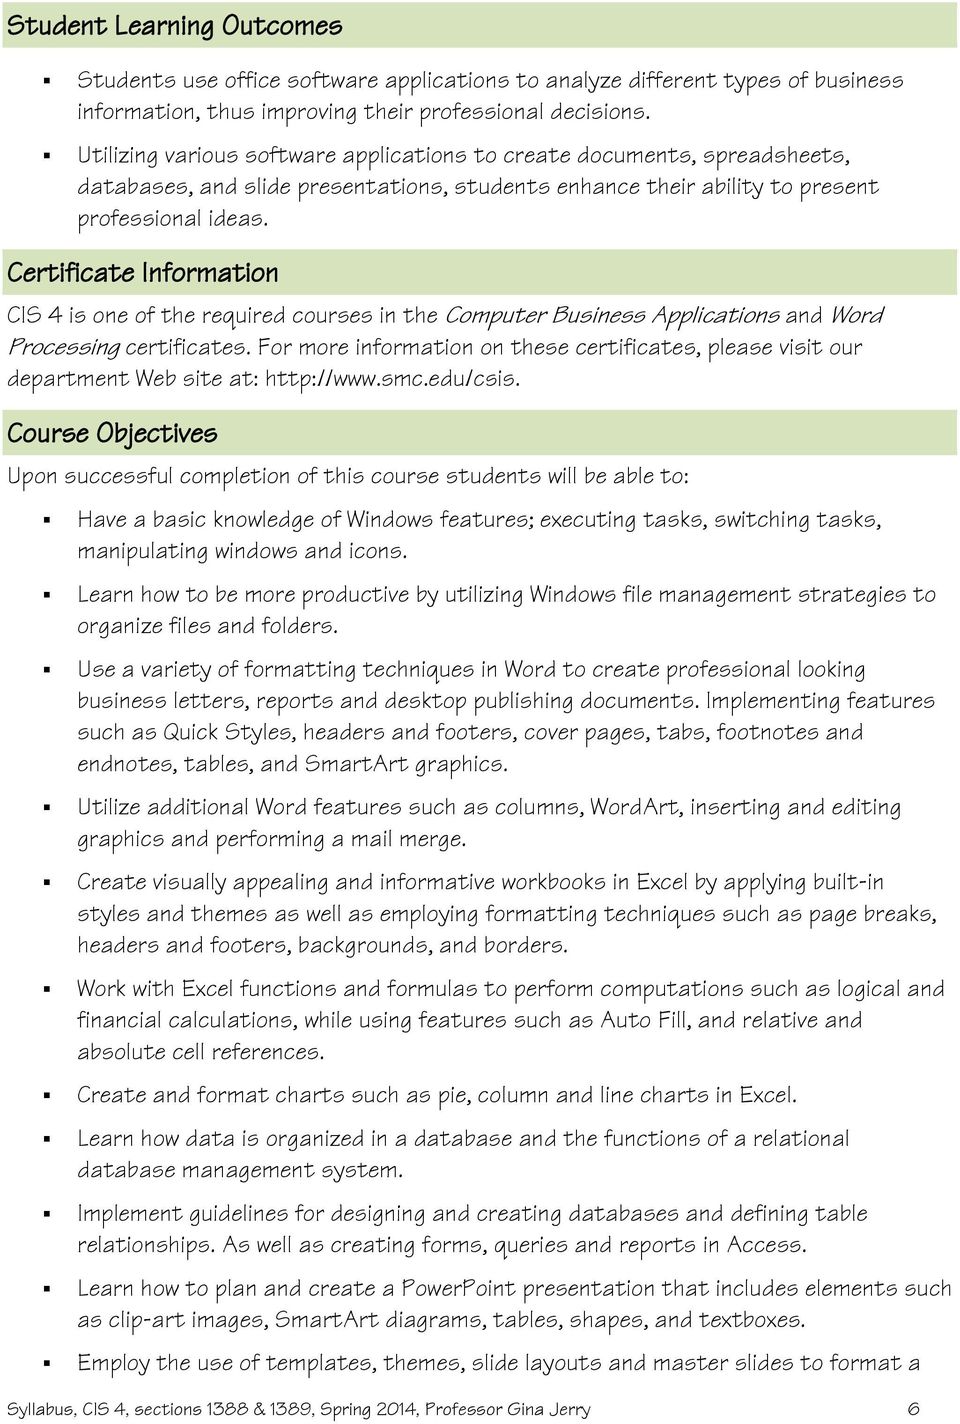 Certificate Information CIS 4 is one of the required courses in the Computer Business Applications and Word Processing certificates.